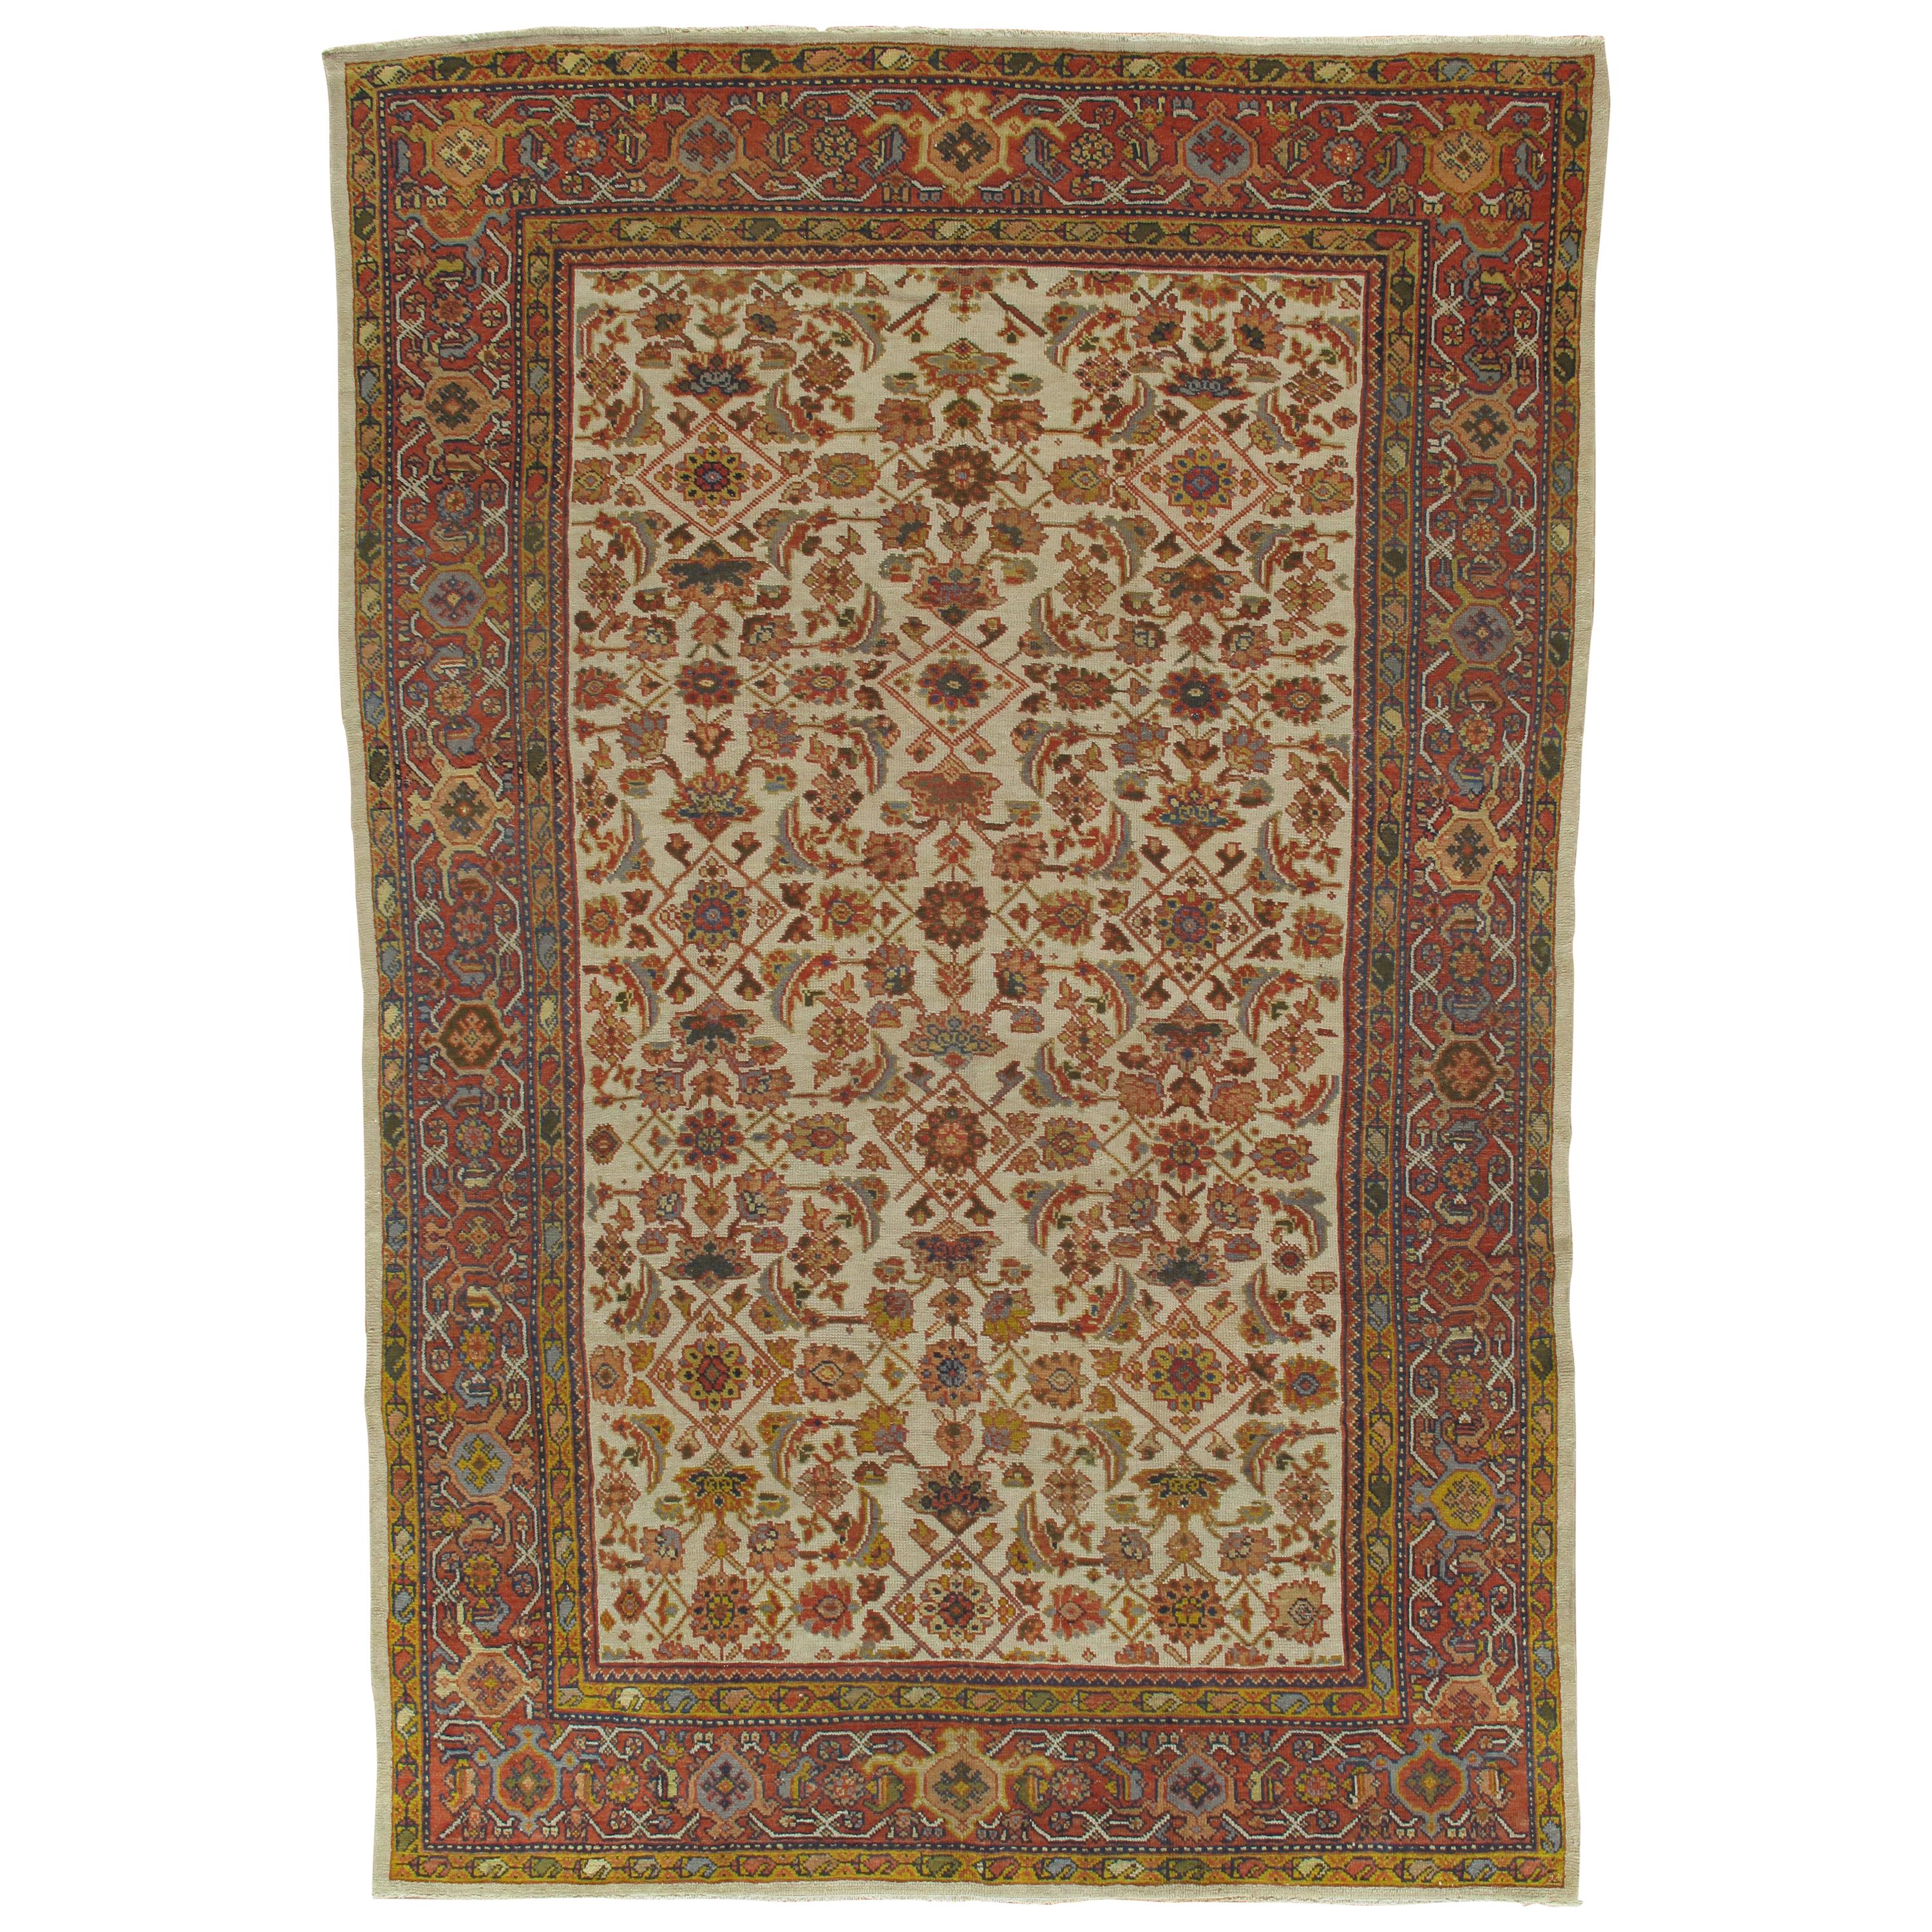 Antique Persian Sultanabad, Wool Handmade Beige, Gold, Navy and Red Oriental Rug